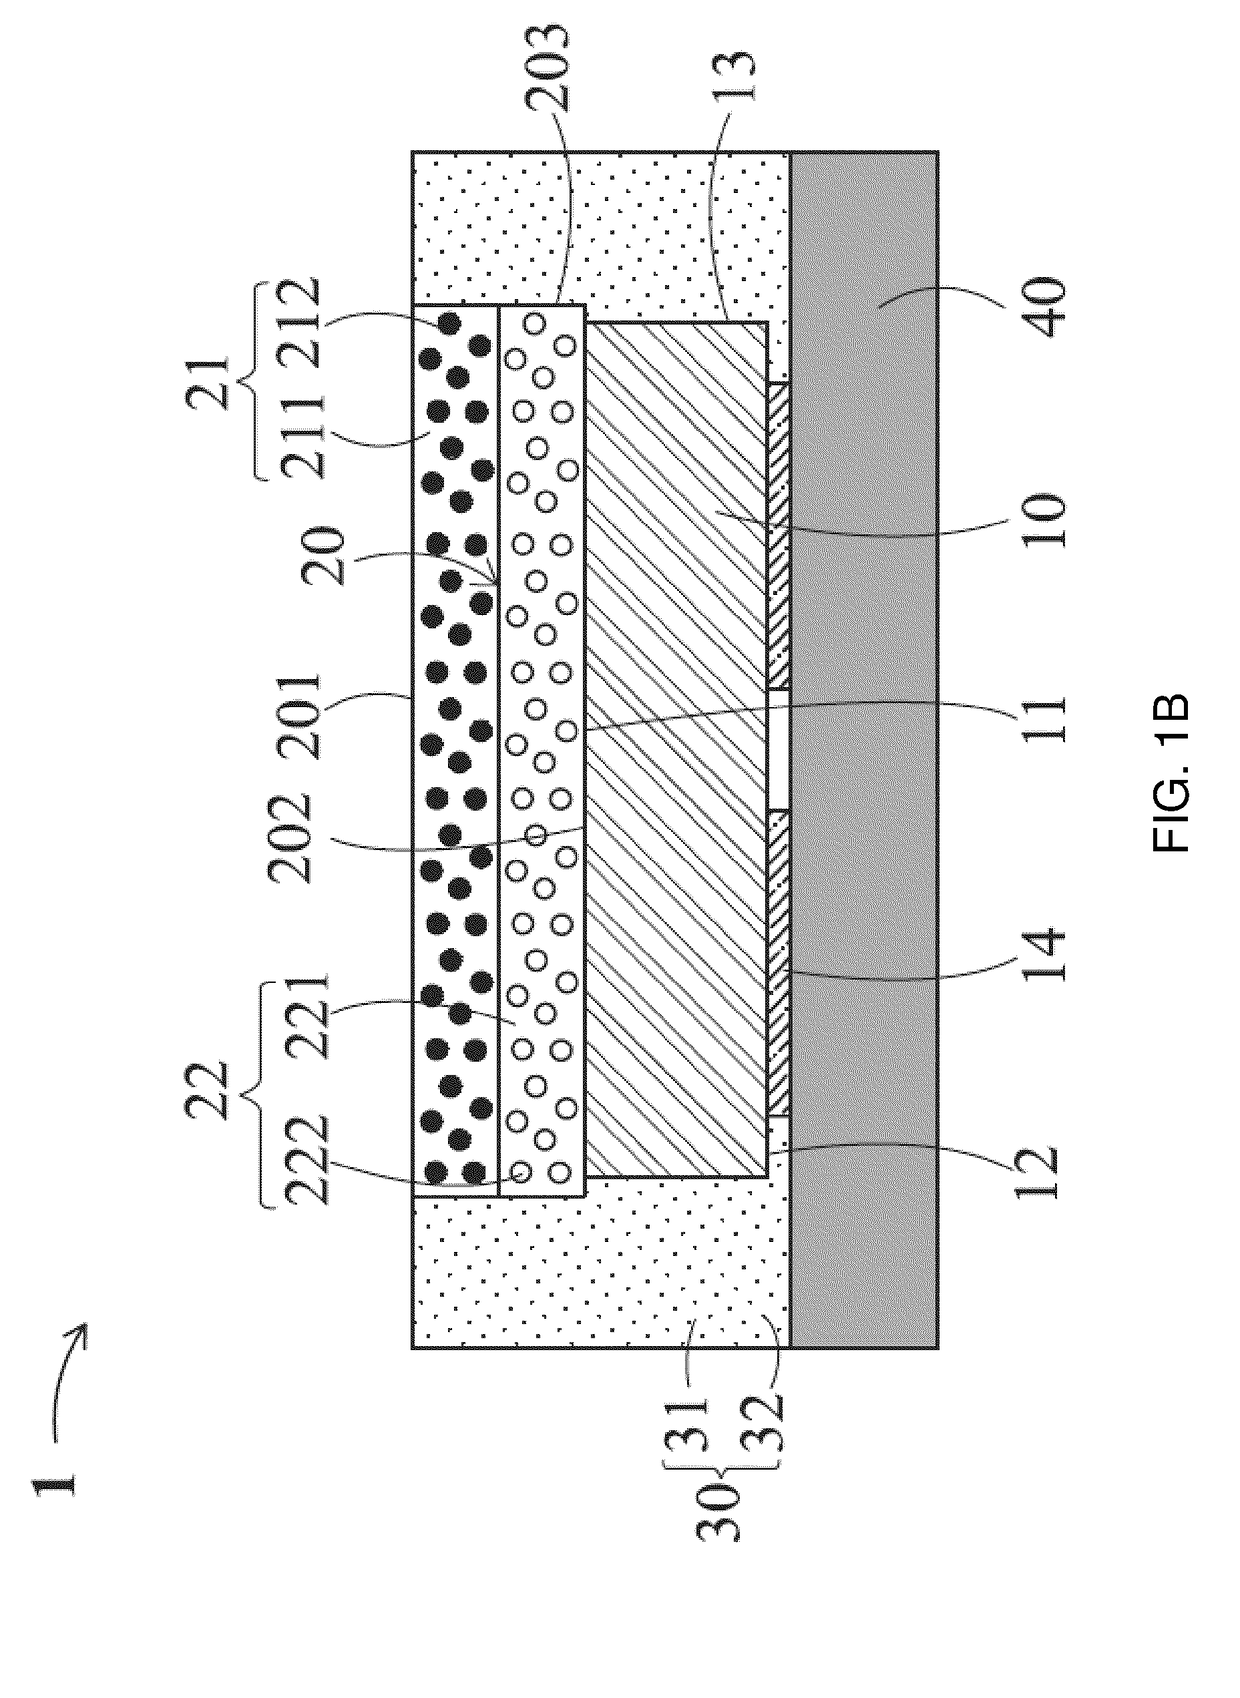 Moisture-resistant chip scale packaging light-emitting device